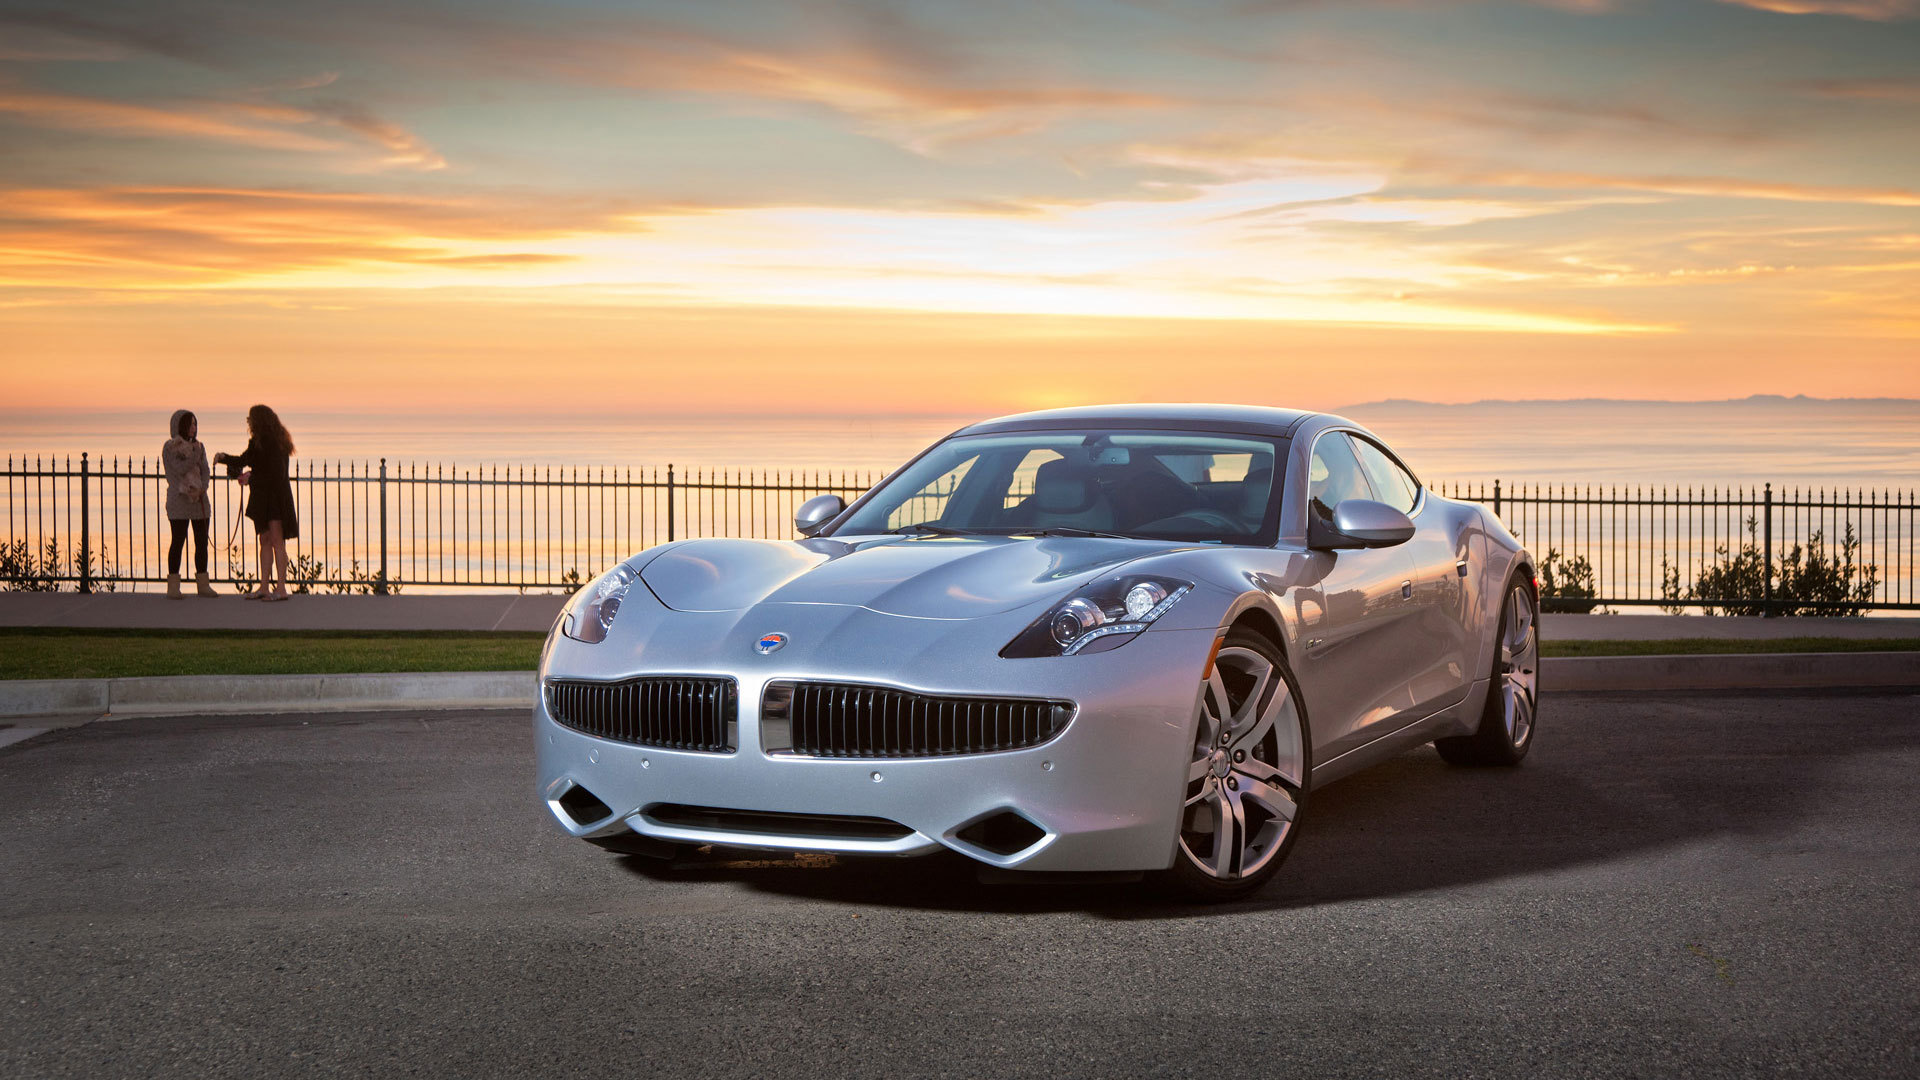 Fisker Karma Electric Car Hd Images Promoting Eco Friendly Travel